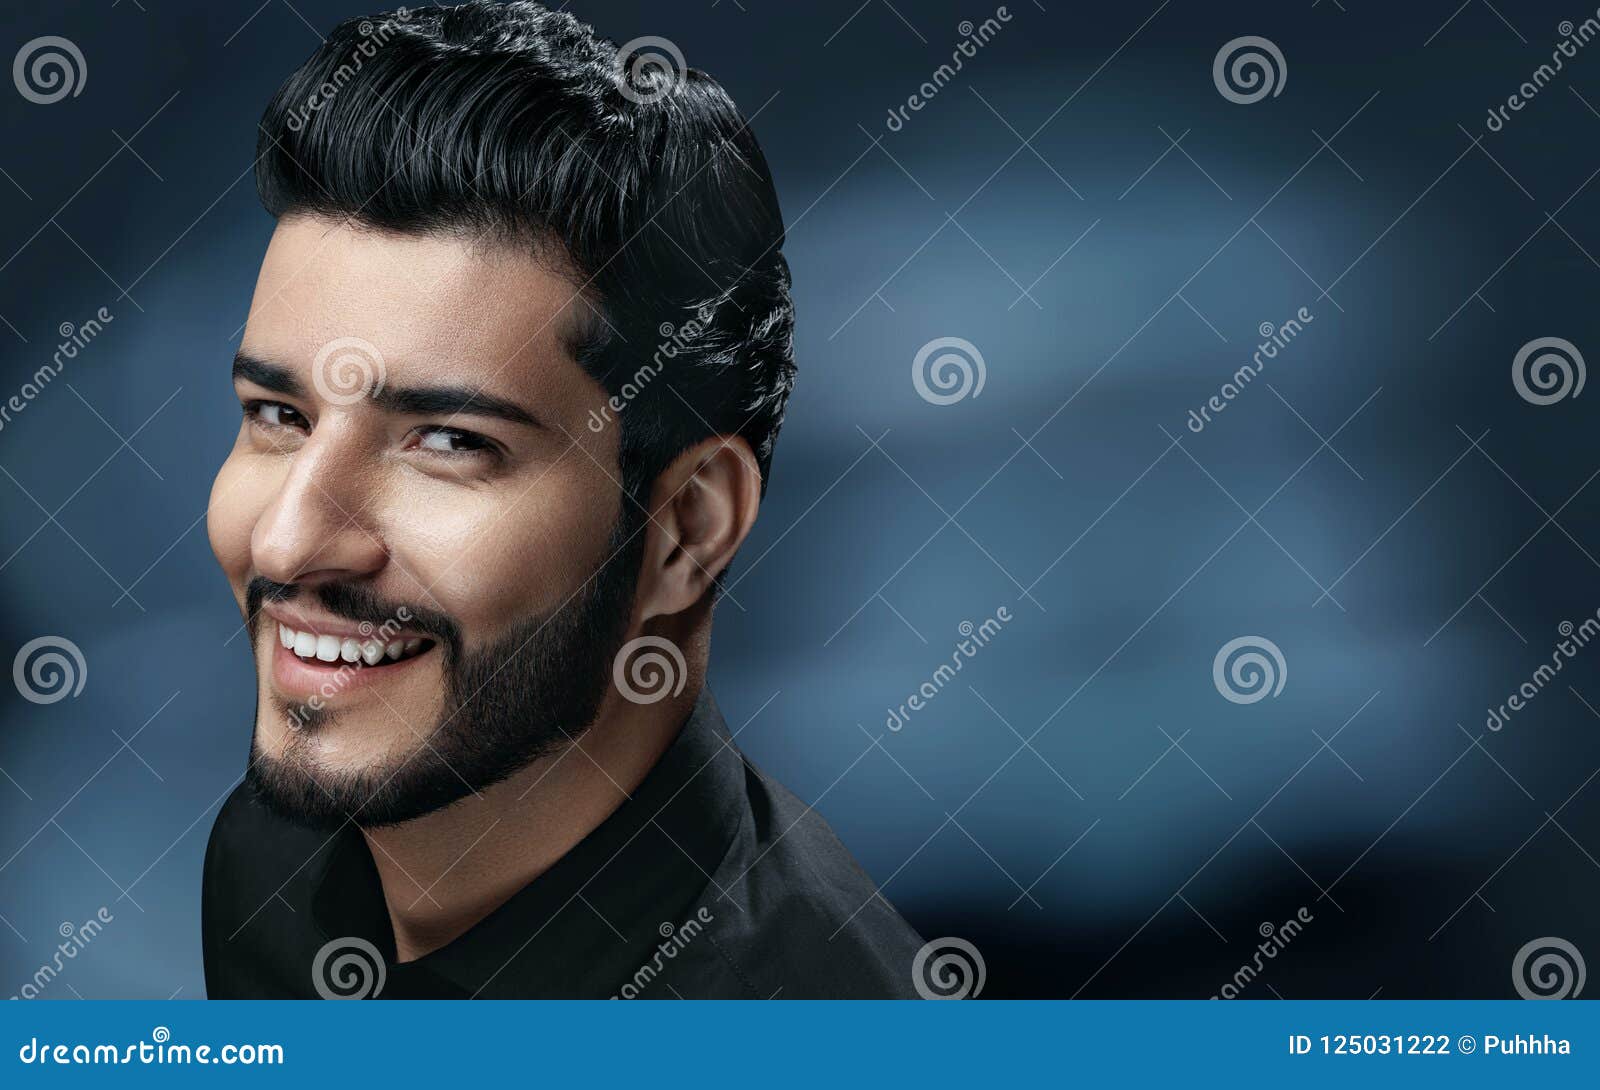 Men Hair Beauty. Handsome Man Model with Black Hair and Beard Stock Photo -  Image of hairstyle, beauty: 125031222